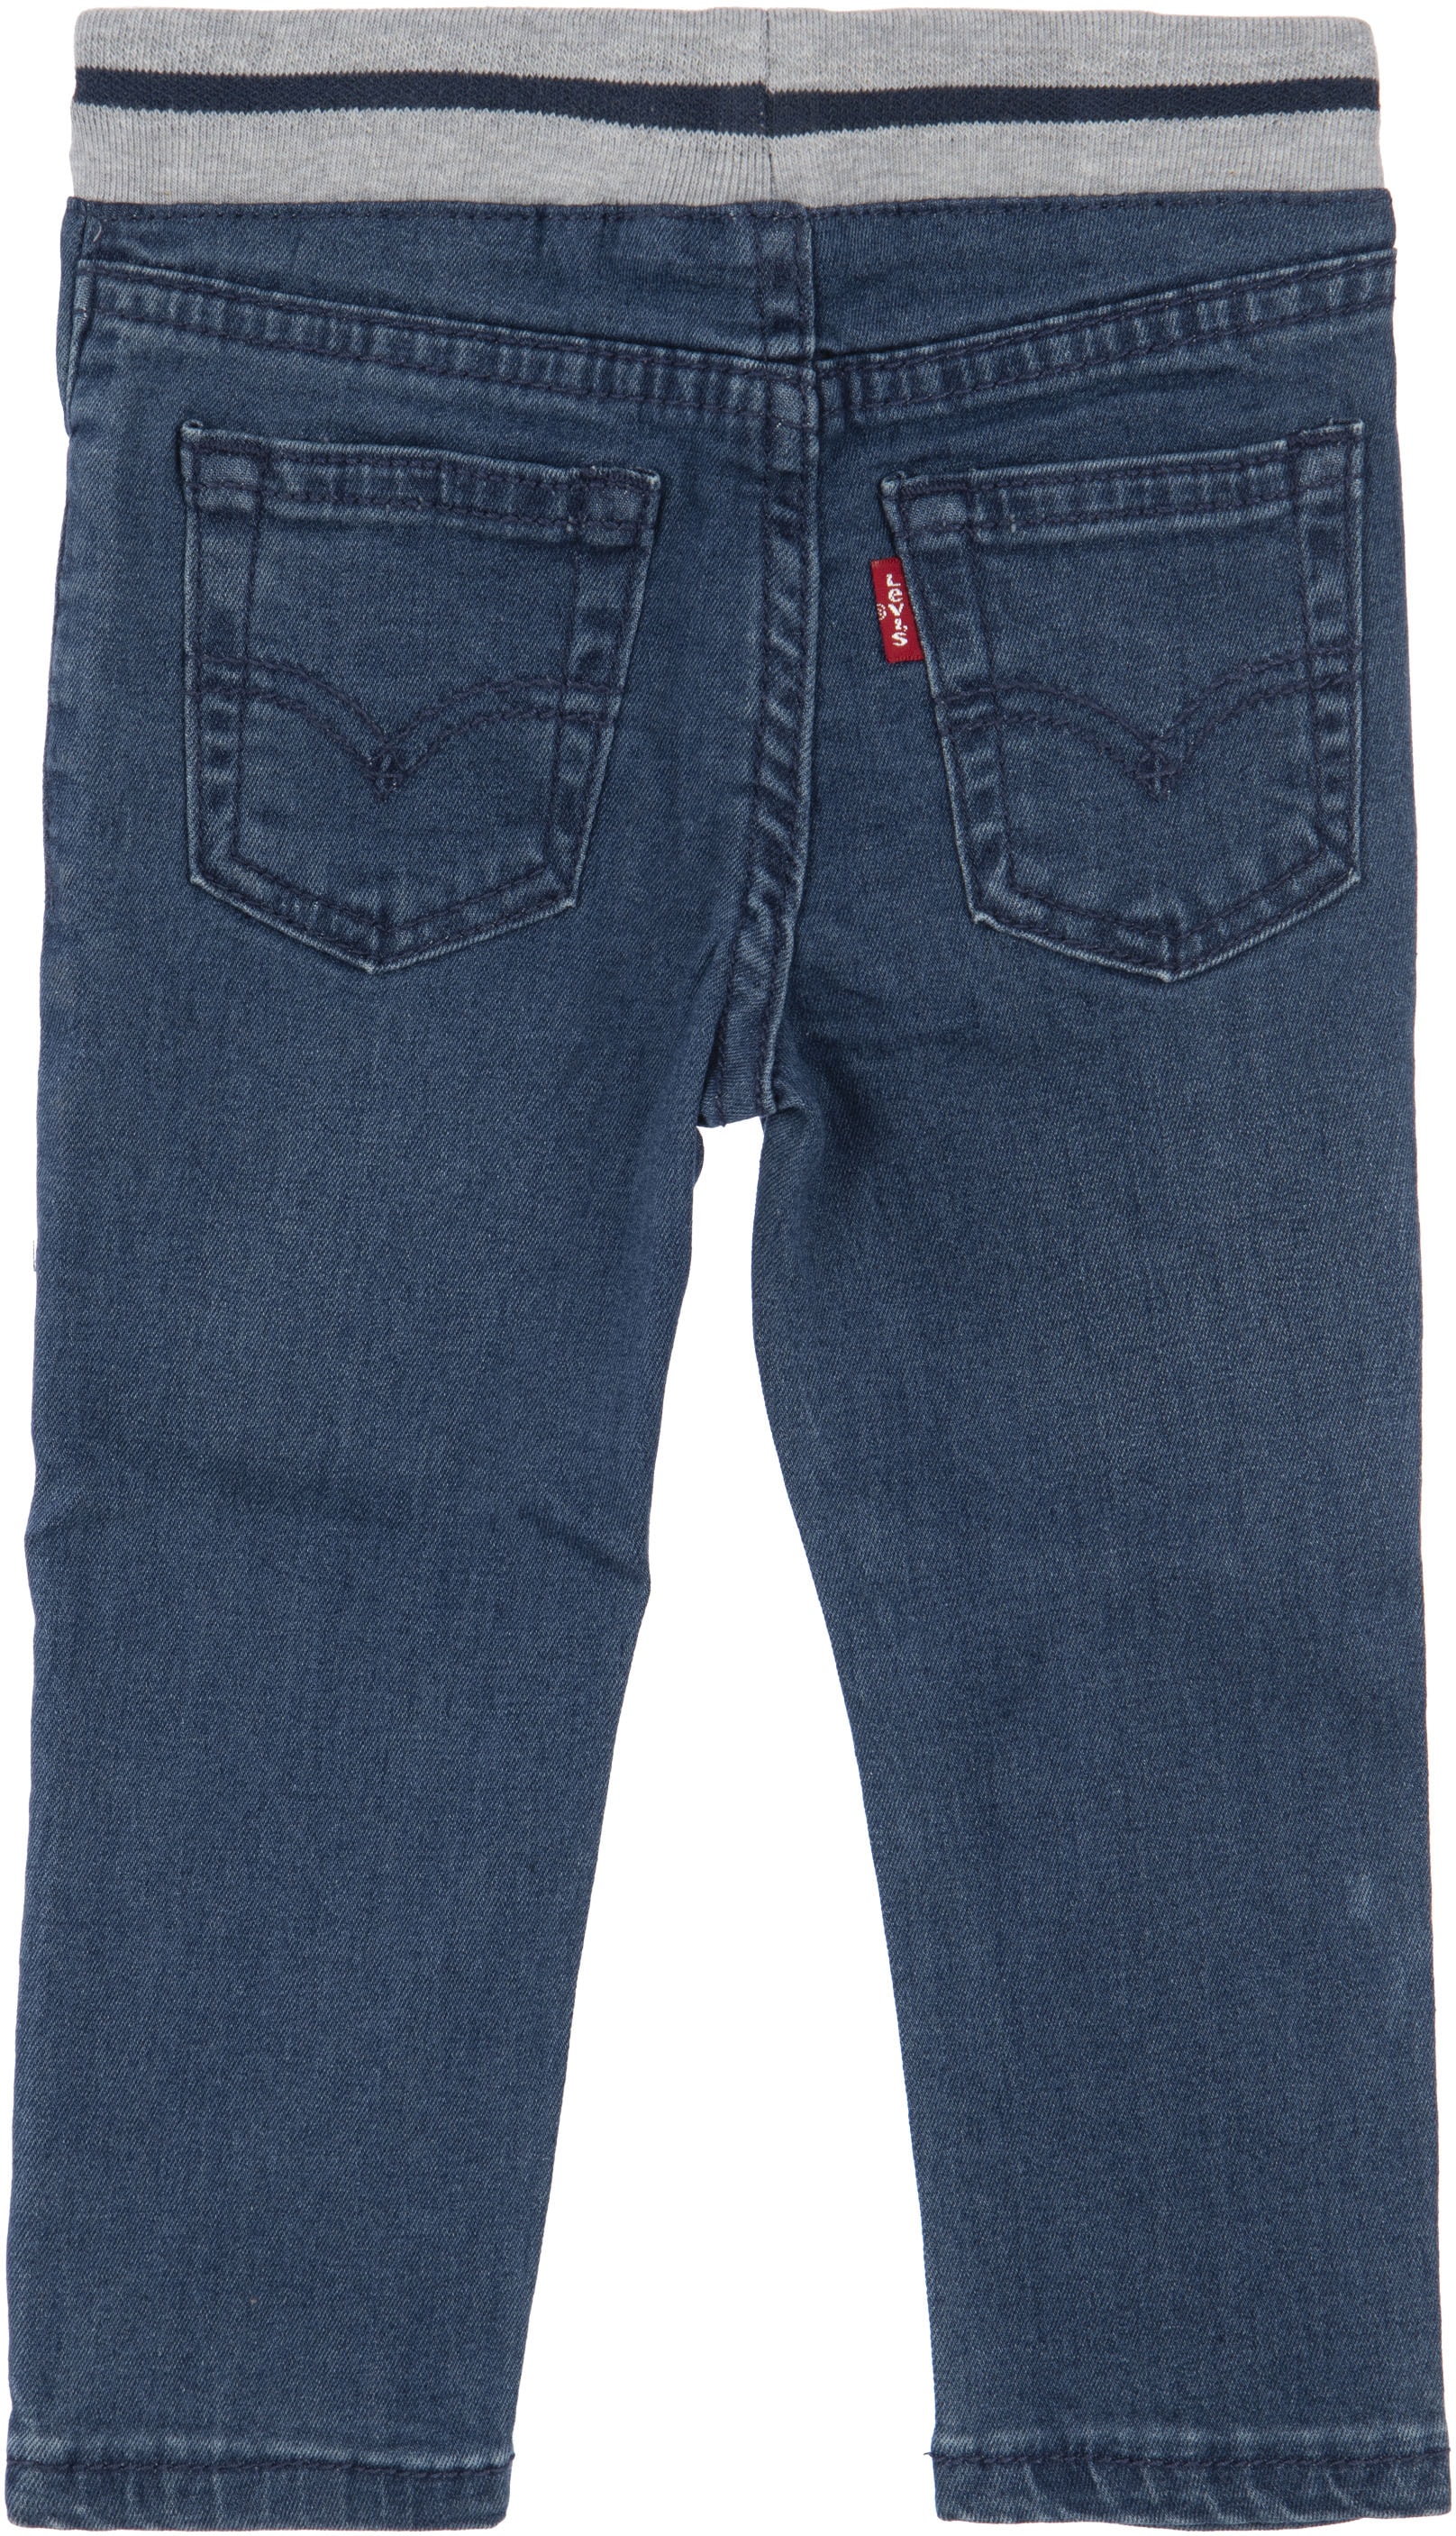 ON »PULL Levi\'s® JEANS«, Baby ♕ SKINNY BOYS for Kids Schlupfjeans bei